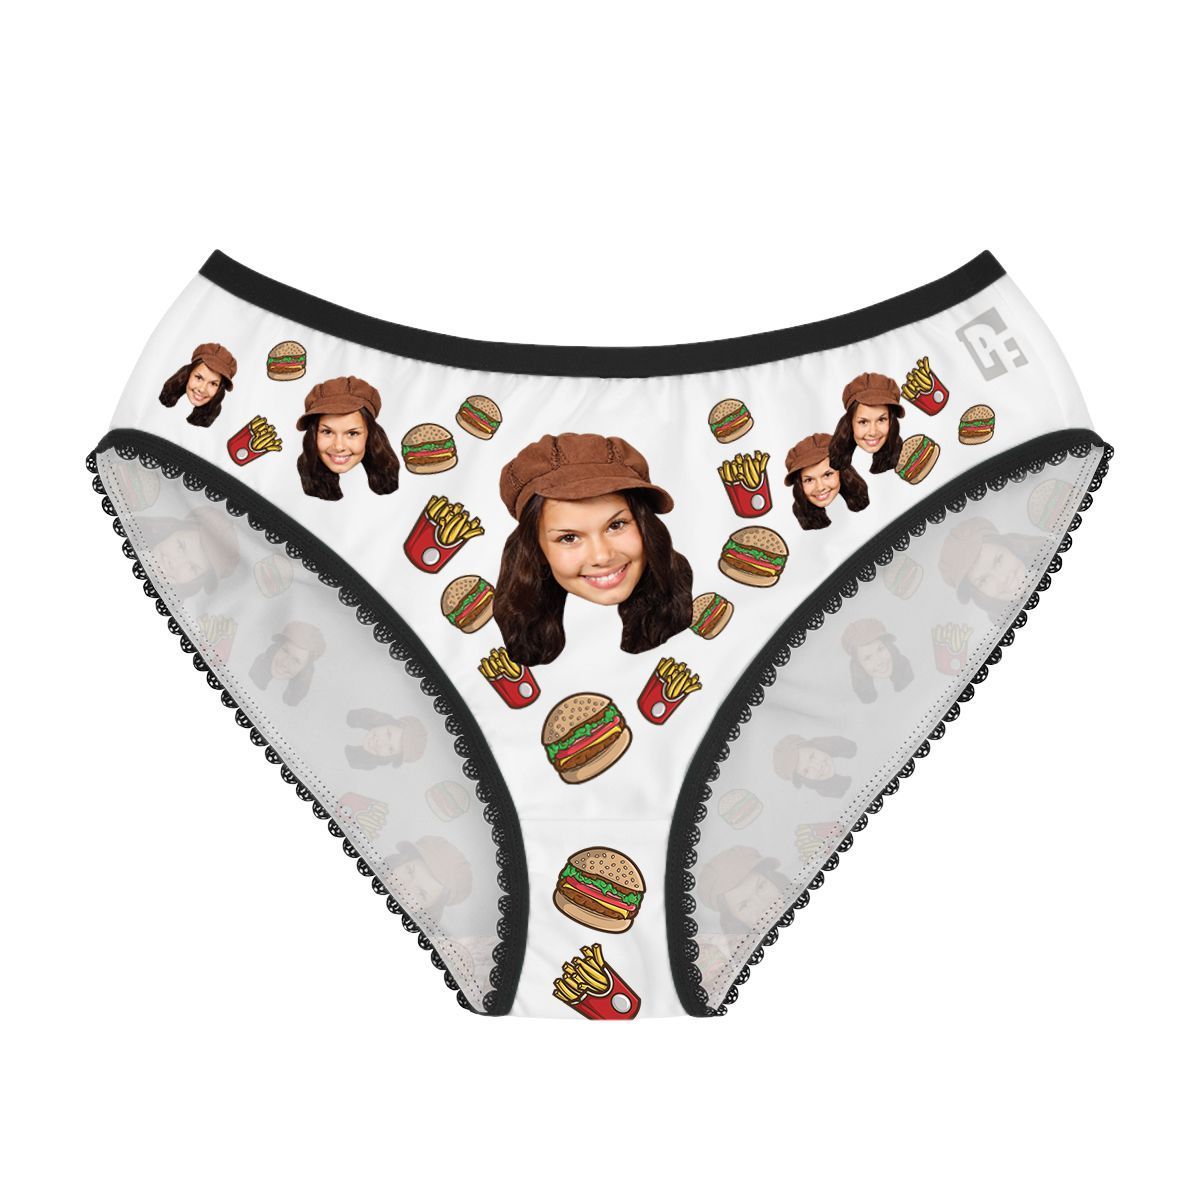 White Fastfood women's underwear briefs personalized with photo printed on them